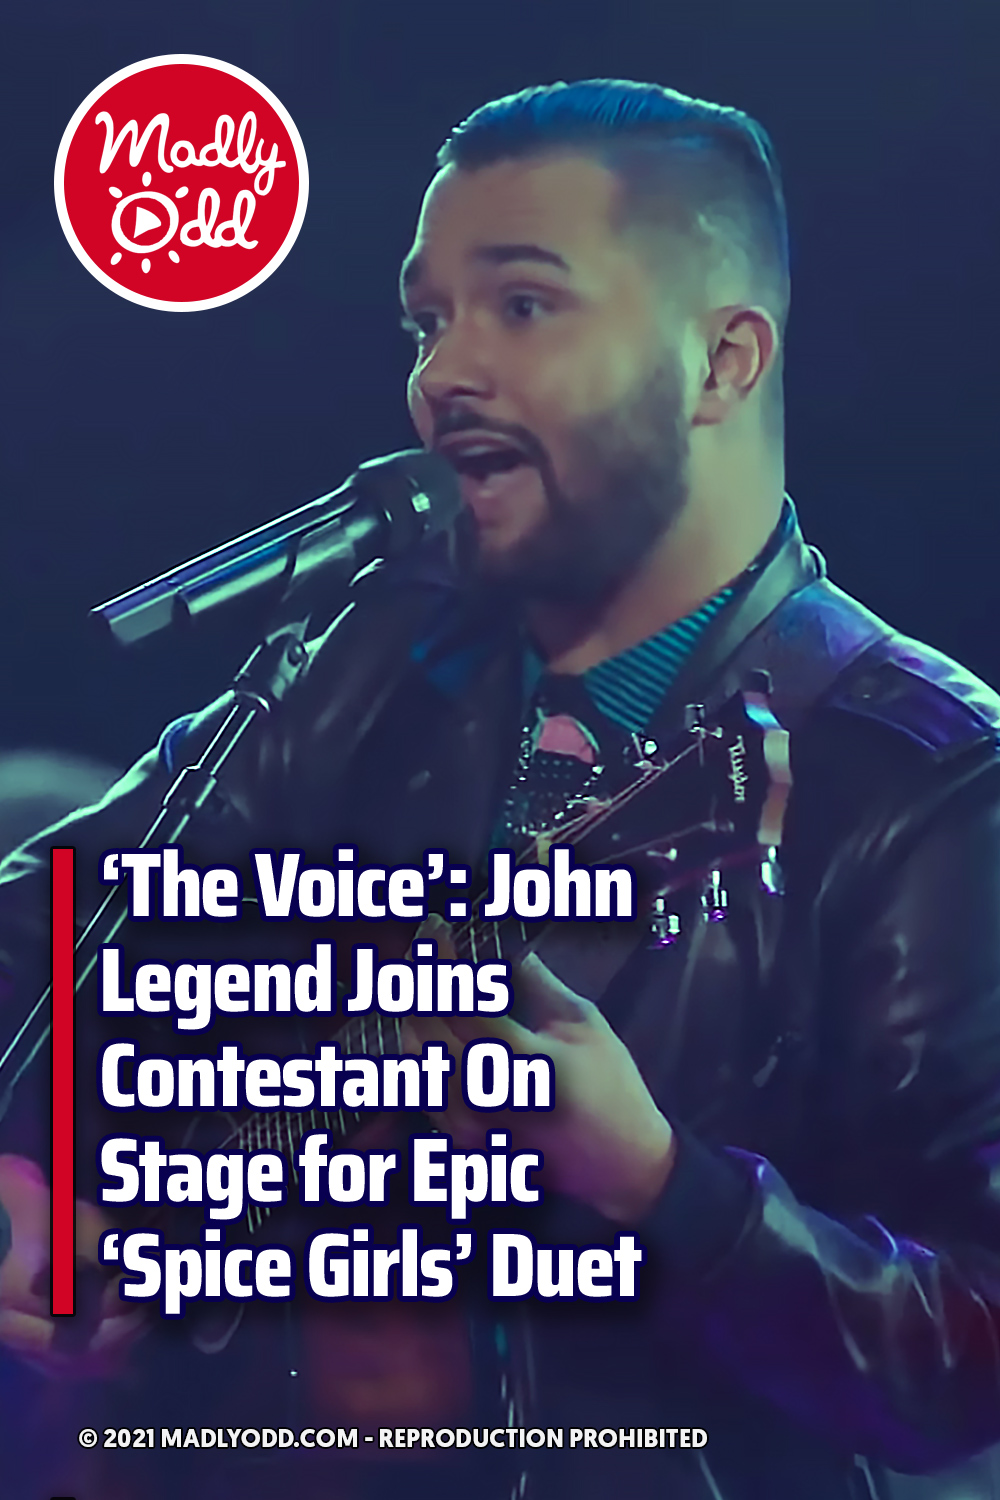 \'The Voice\': John Legend Joins Contestant On Stage for Epic \'Spice Girls\' Duet